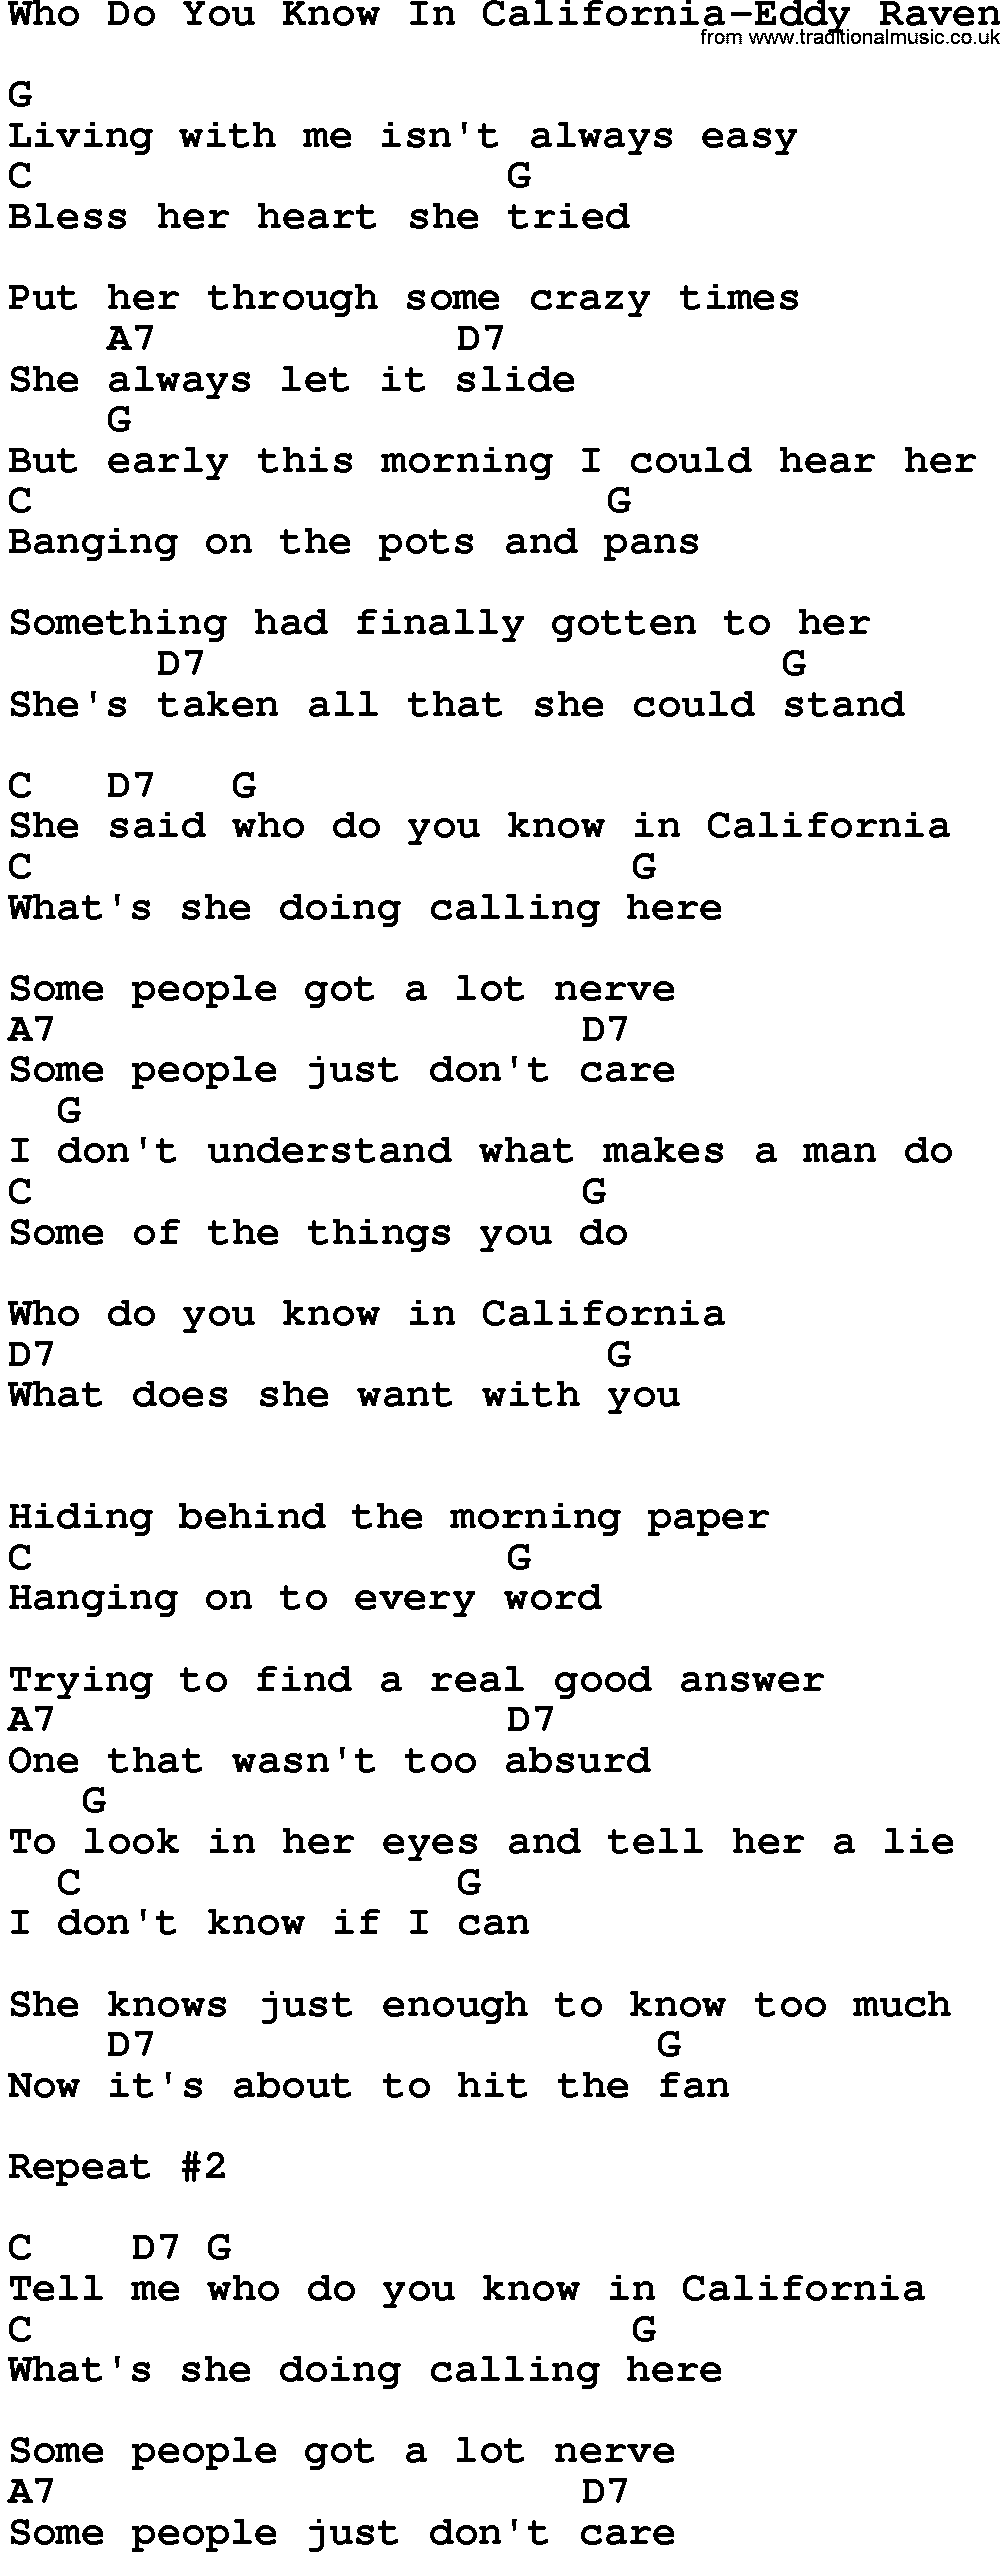 Country music song: Who Do You Know In California-Eddy Raven lyrics and chords